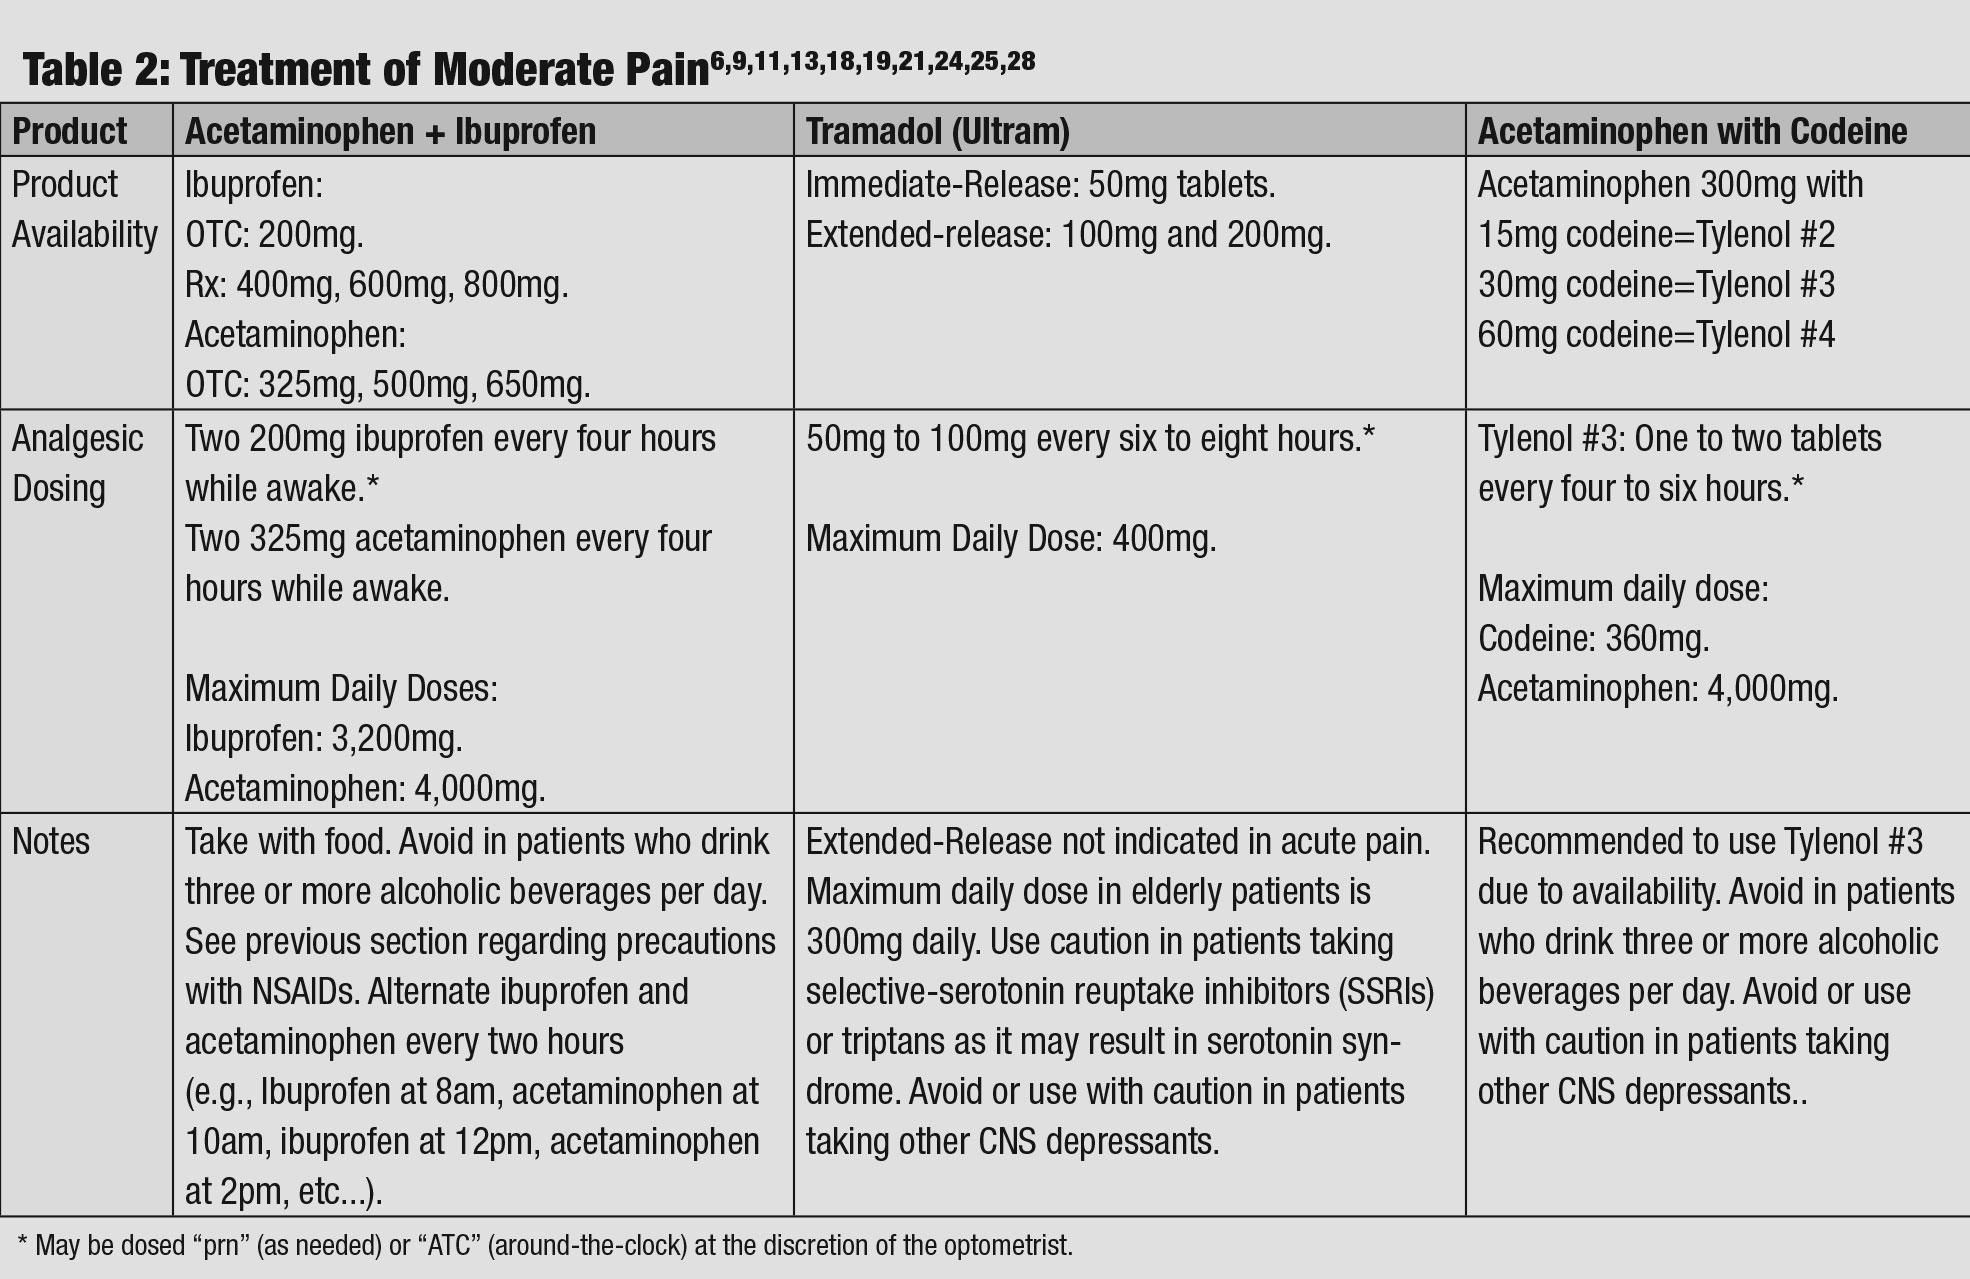 Treatment of Moderate Pain.